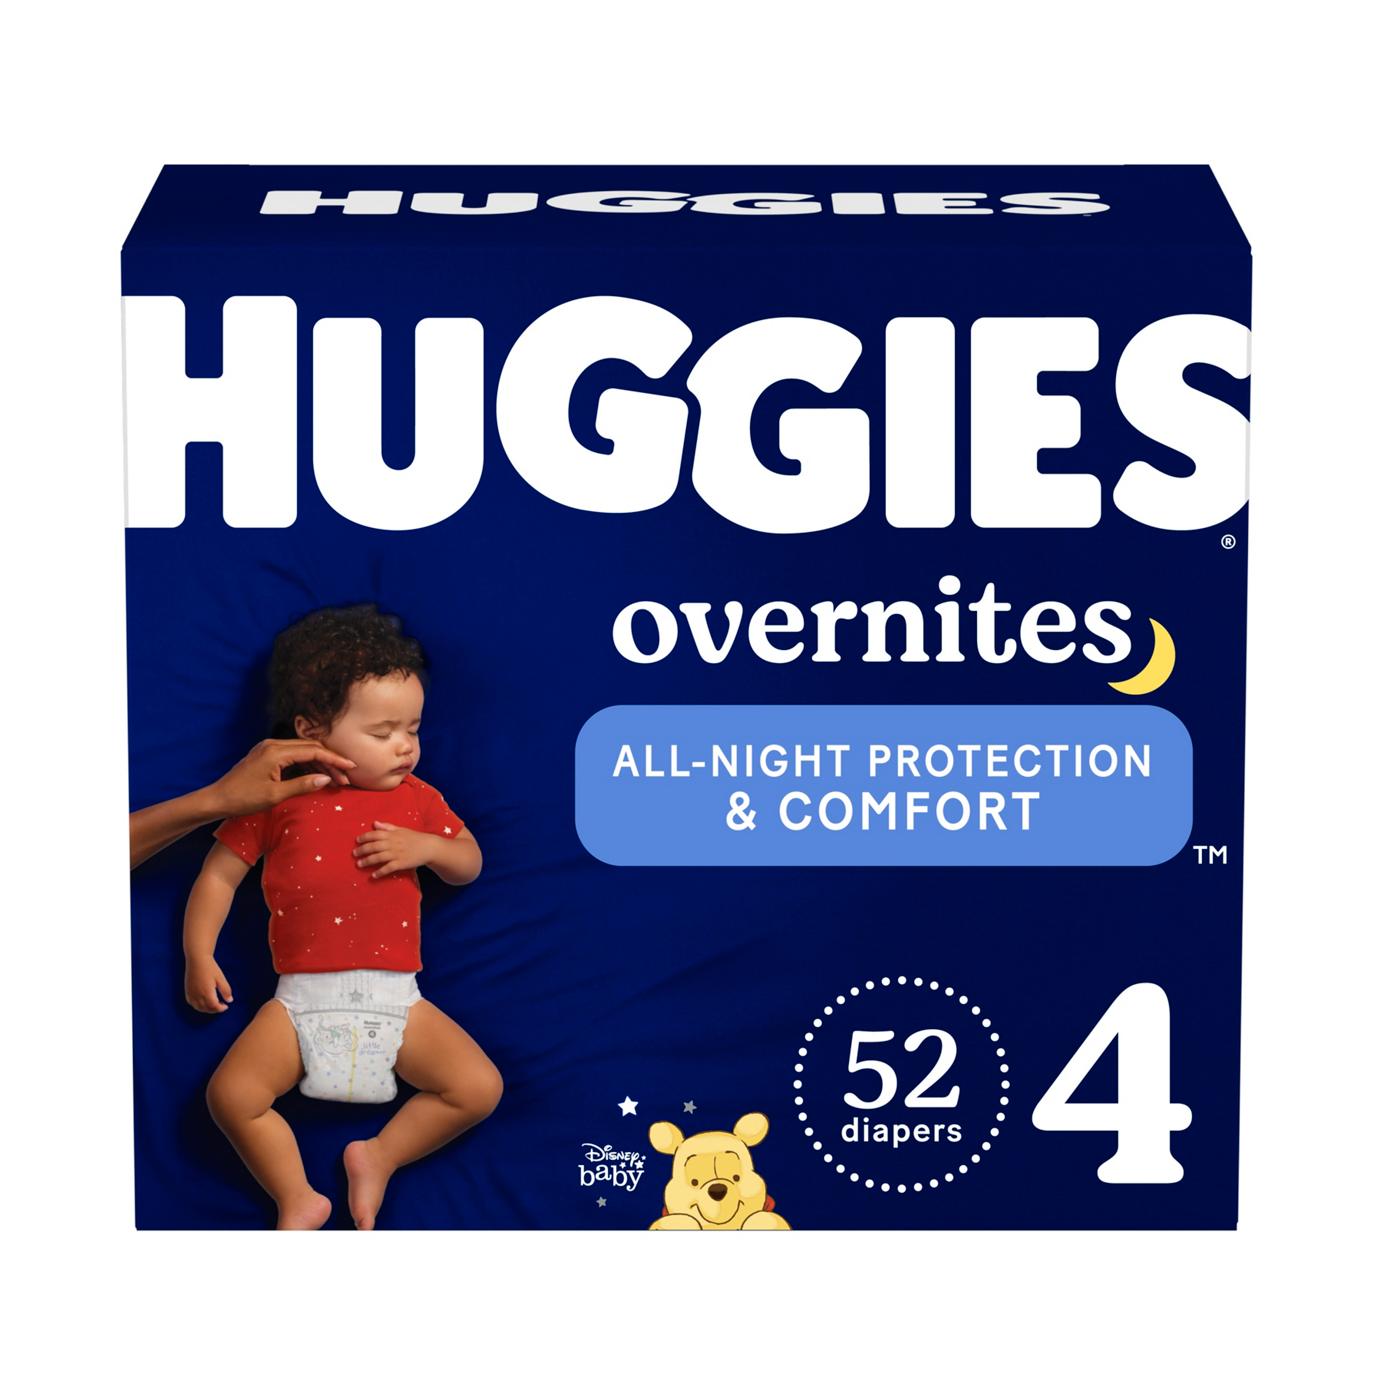 Huggies Overnites Nighttime Baby Diapers - Size 4; image 1 of 8